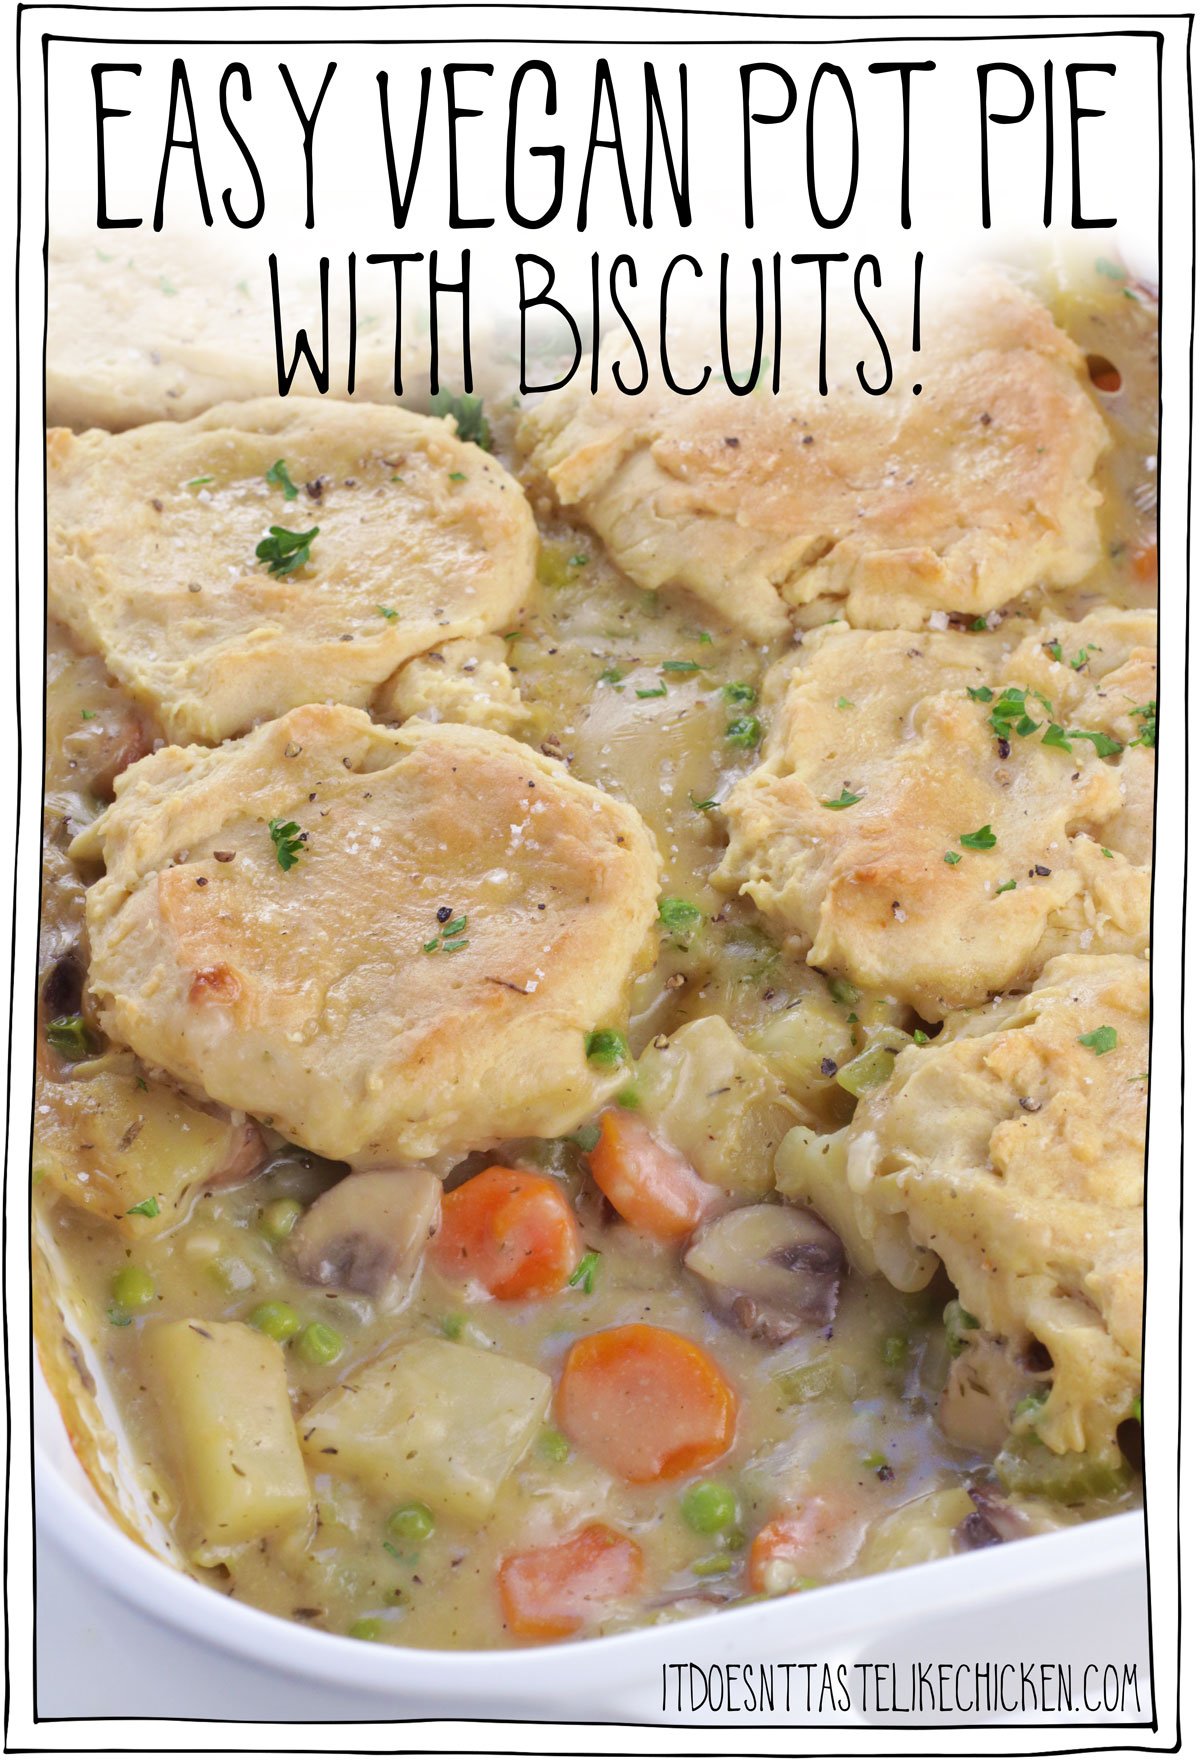 This vegan pot pie is easy to make, with a medley of vegetables in a creamy sauce, and flaky buttery vegan biscuits, yum!  Eating vegan doesn’t mean you have to miss out on the taste of pot pie, especially when you make it yourself. This easy vegan pot pie recipe is the most satisfying home-cooked comfort food. The perfect warming meal to enjoy this time of year! #itdoesnttastelikechicken #veganrecipe